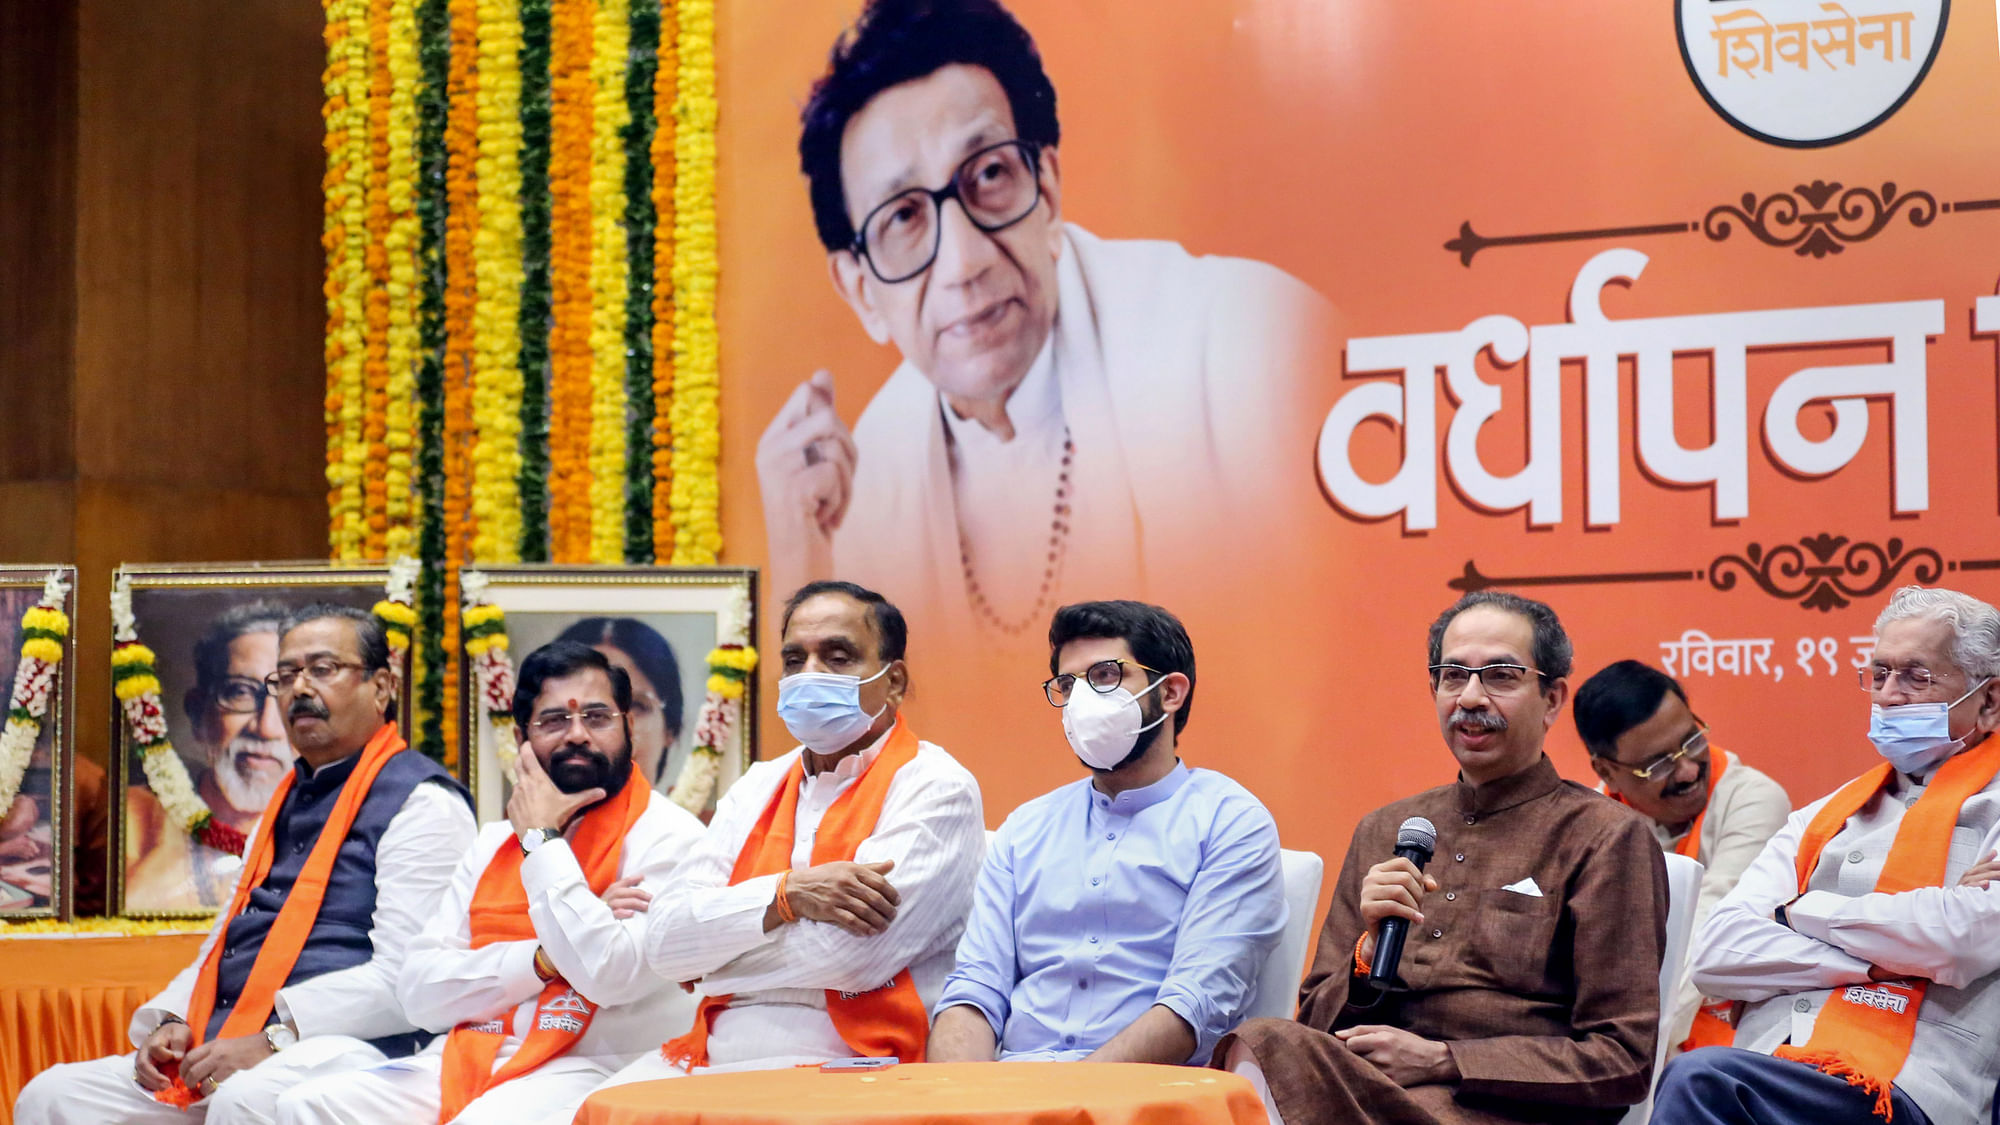 <div class="paragraphs"><p>The deadlock continues between the <a href="https://www.thequint.com/big-story/rebellion-in-shiv-sena">Shiv Sena leadership</a> and the group of rebel MLAs led by Eknath Shinde.</p></div>